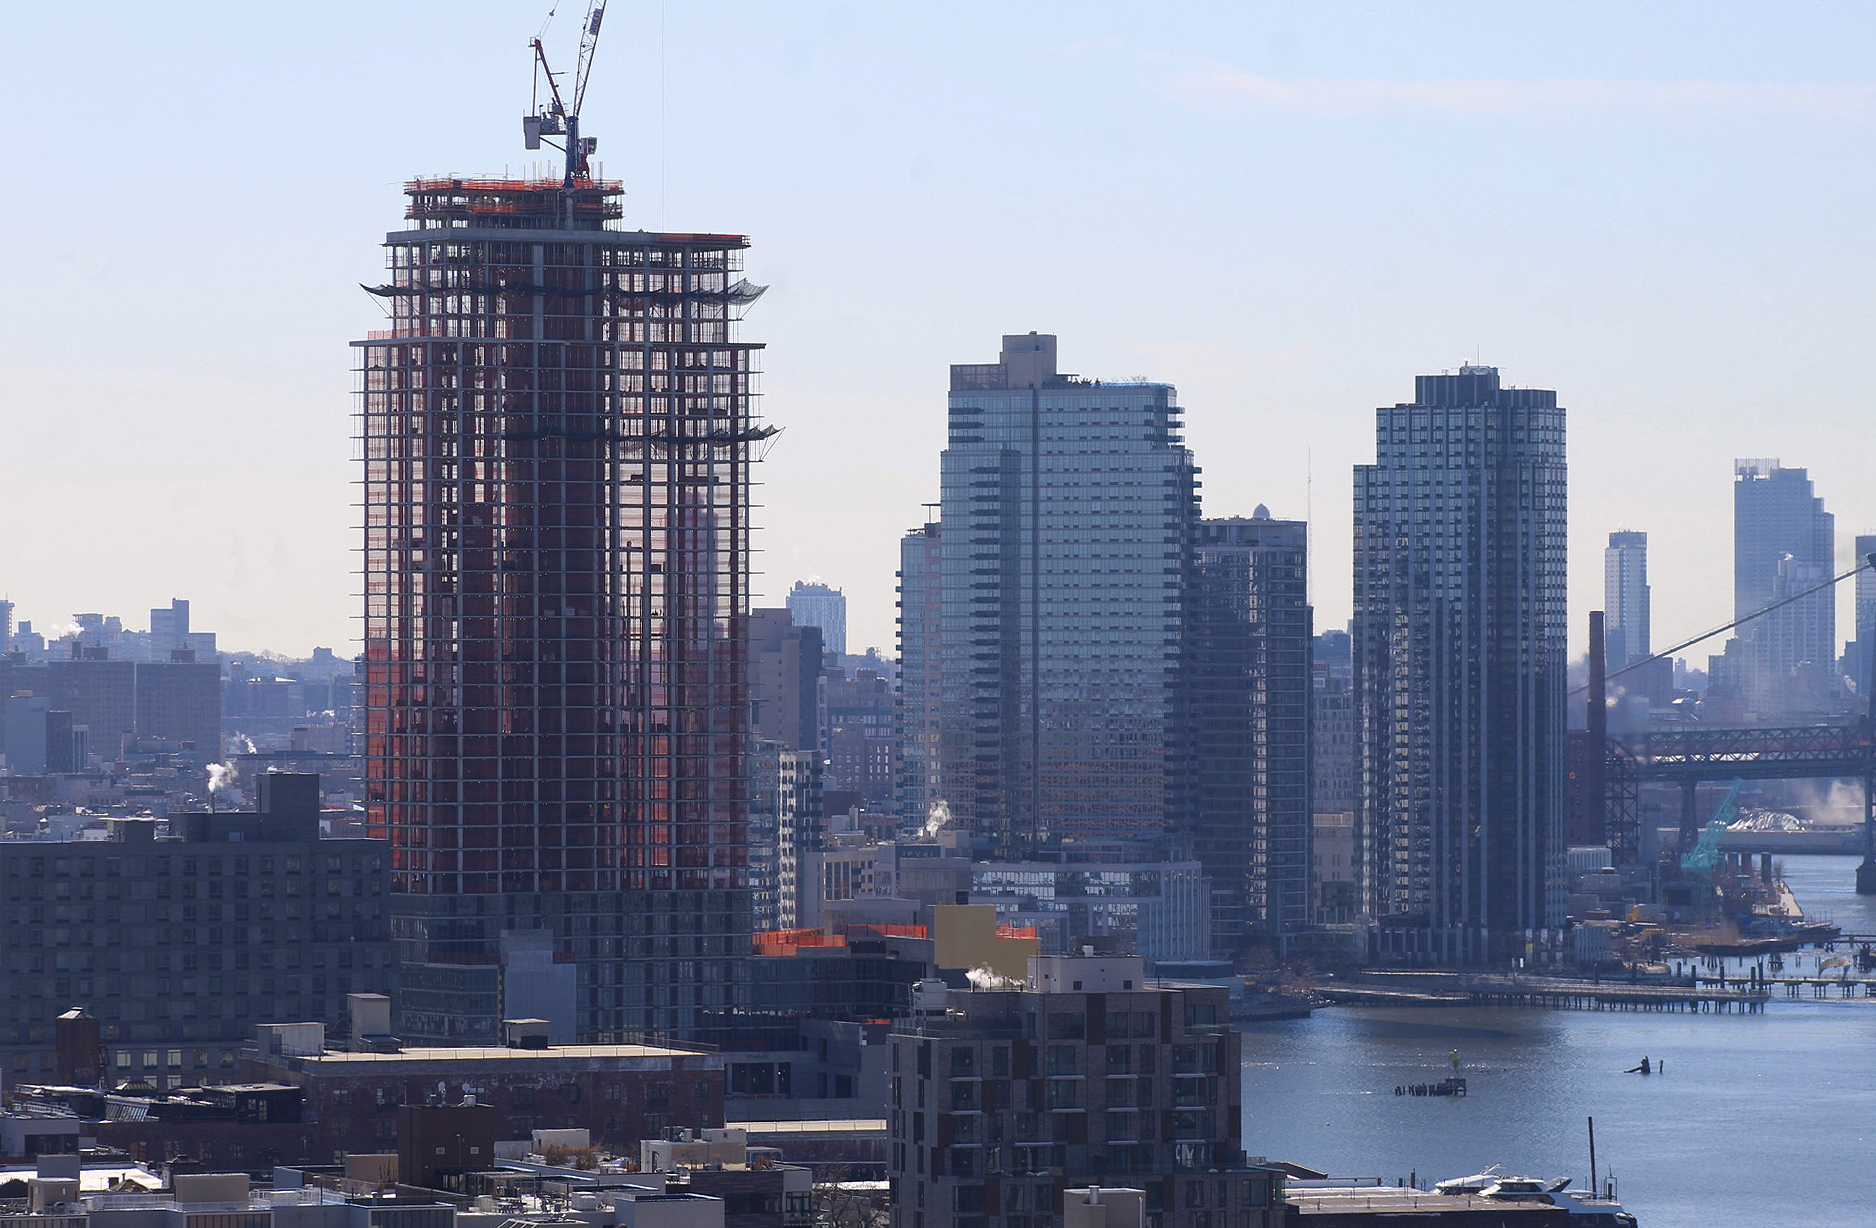 Calyer Place's 40-Story Tower Nears Topping Out in Greenpoint, Brooklyn - New York YIMBY